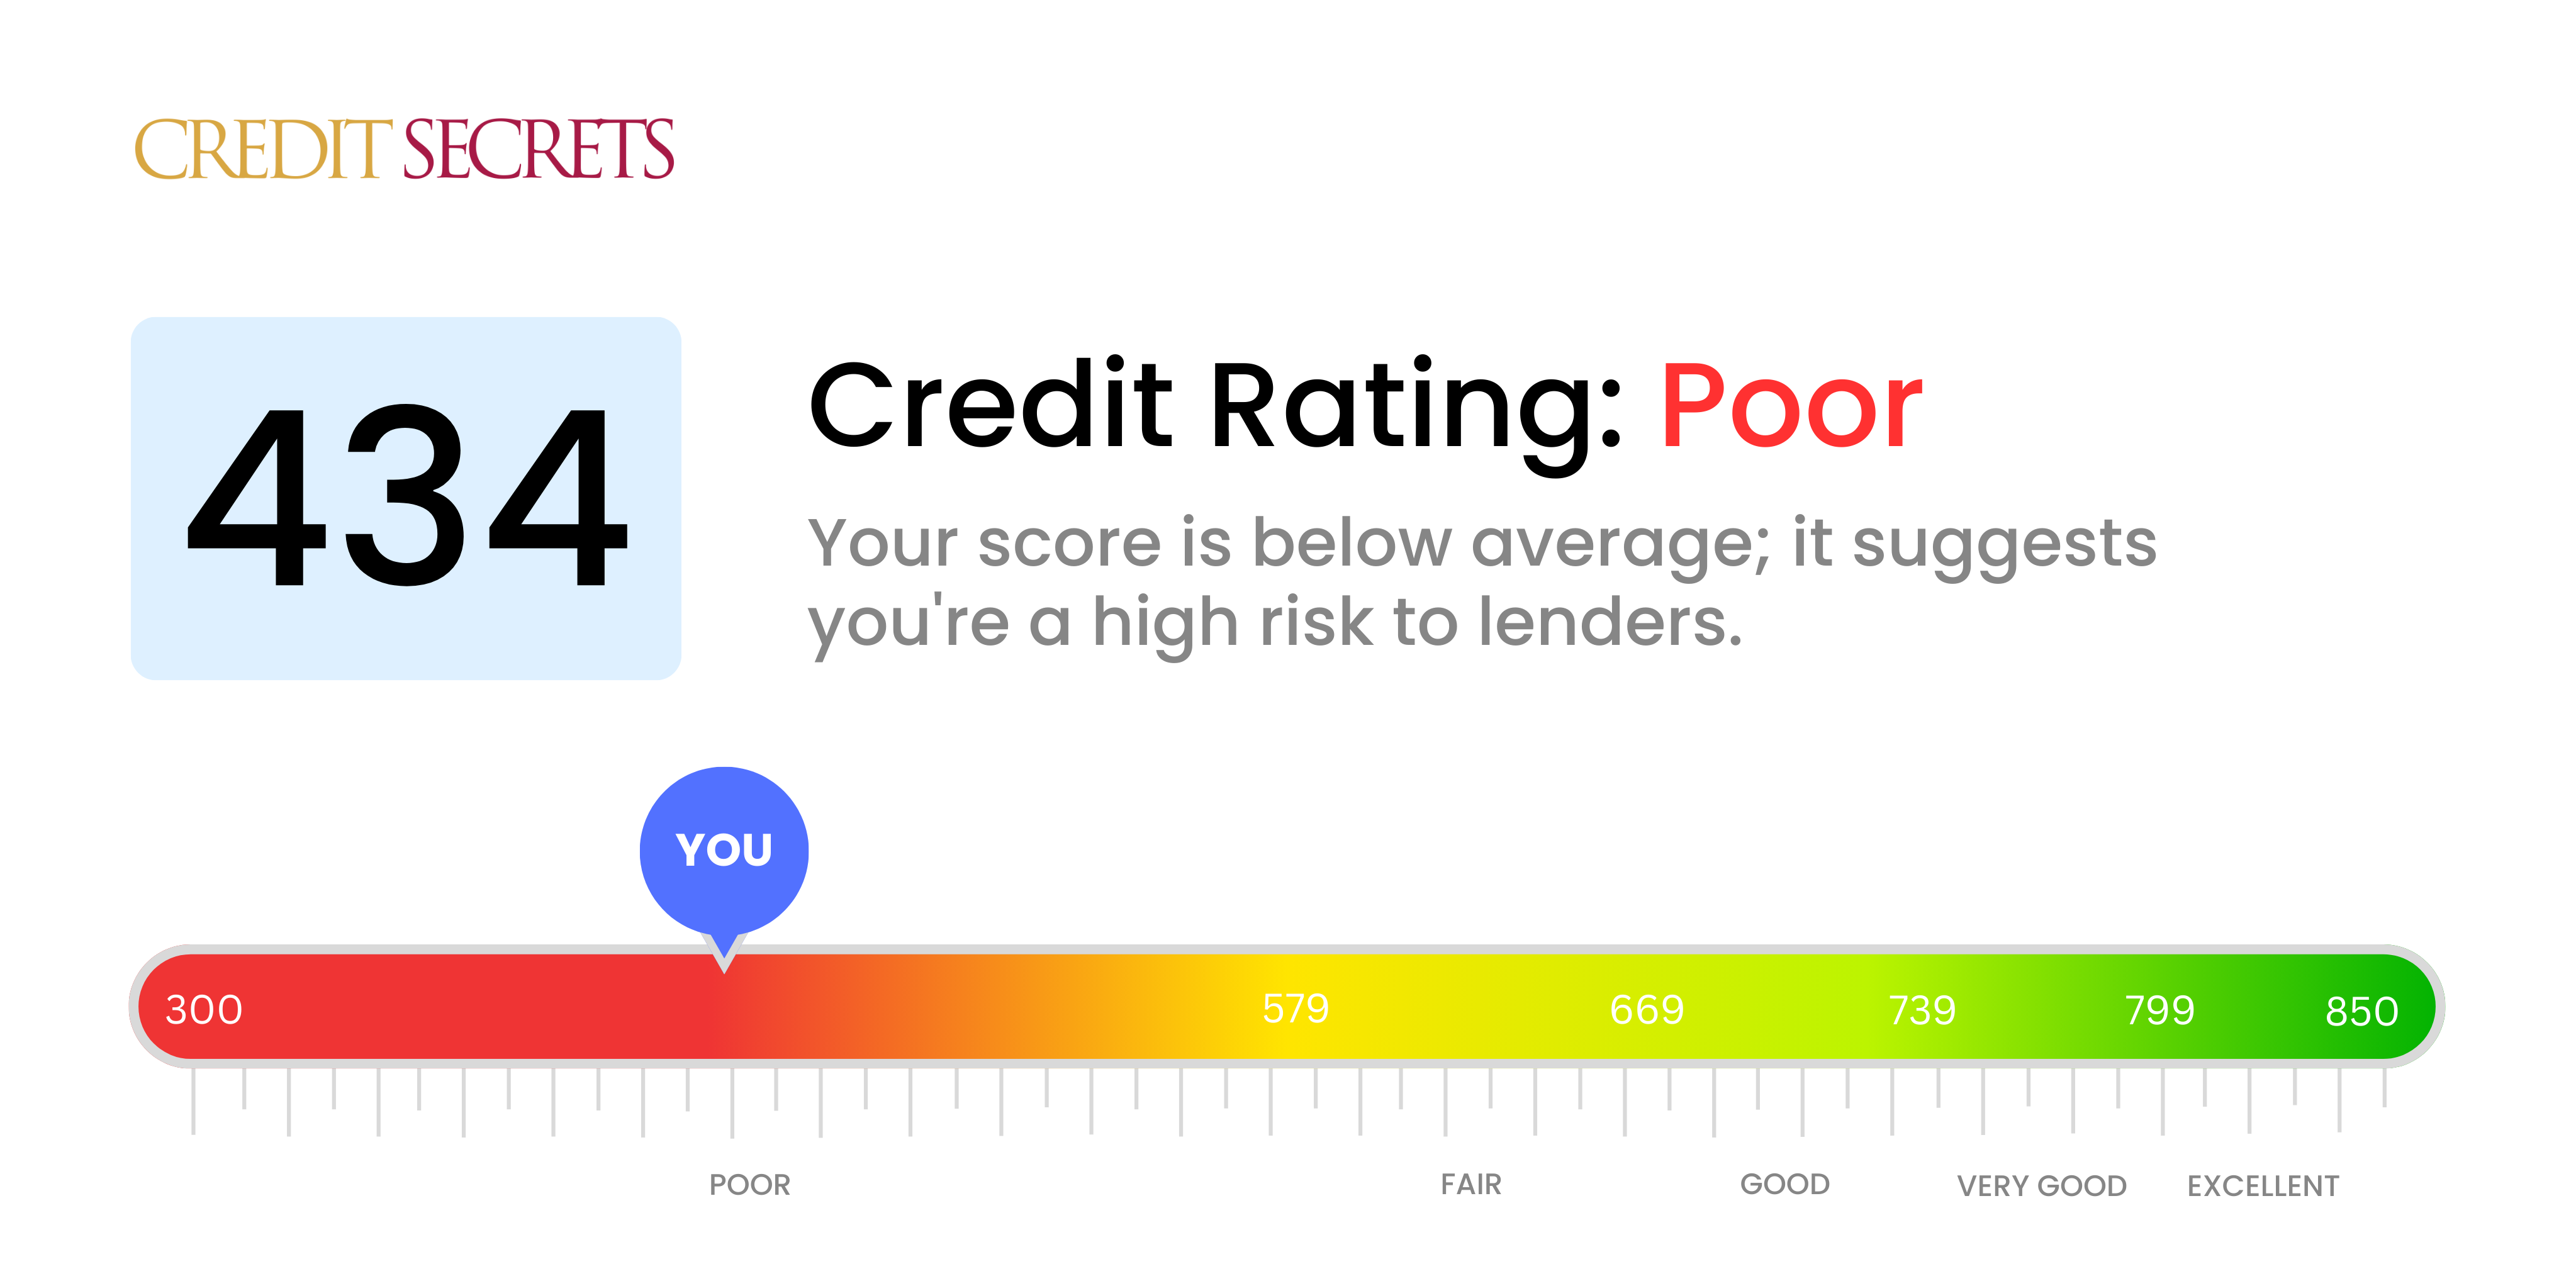 Is 434 a good credit score?